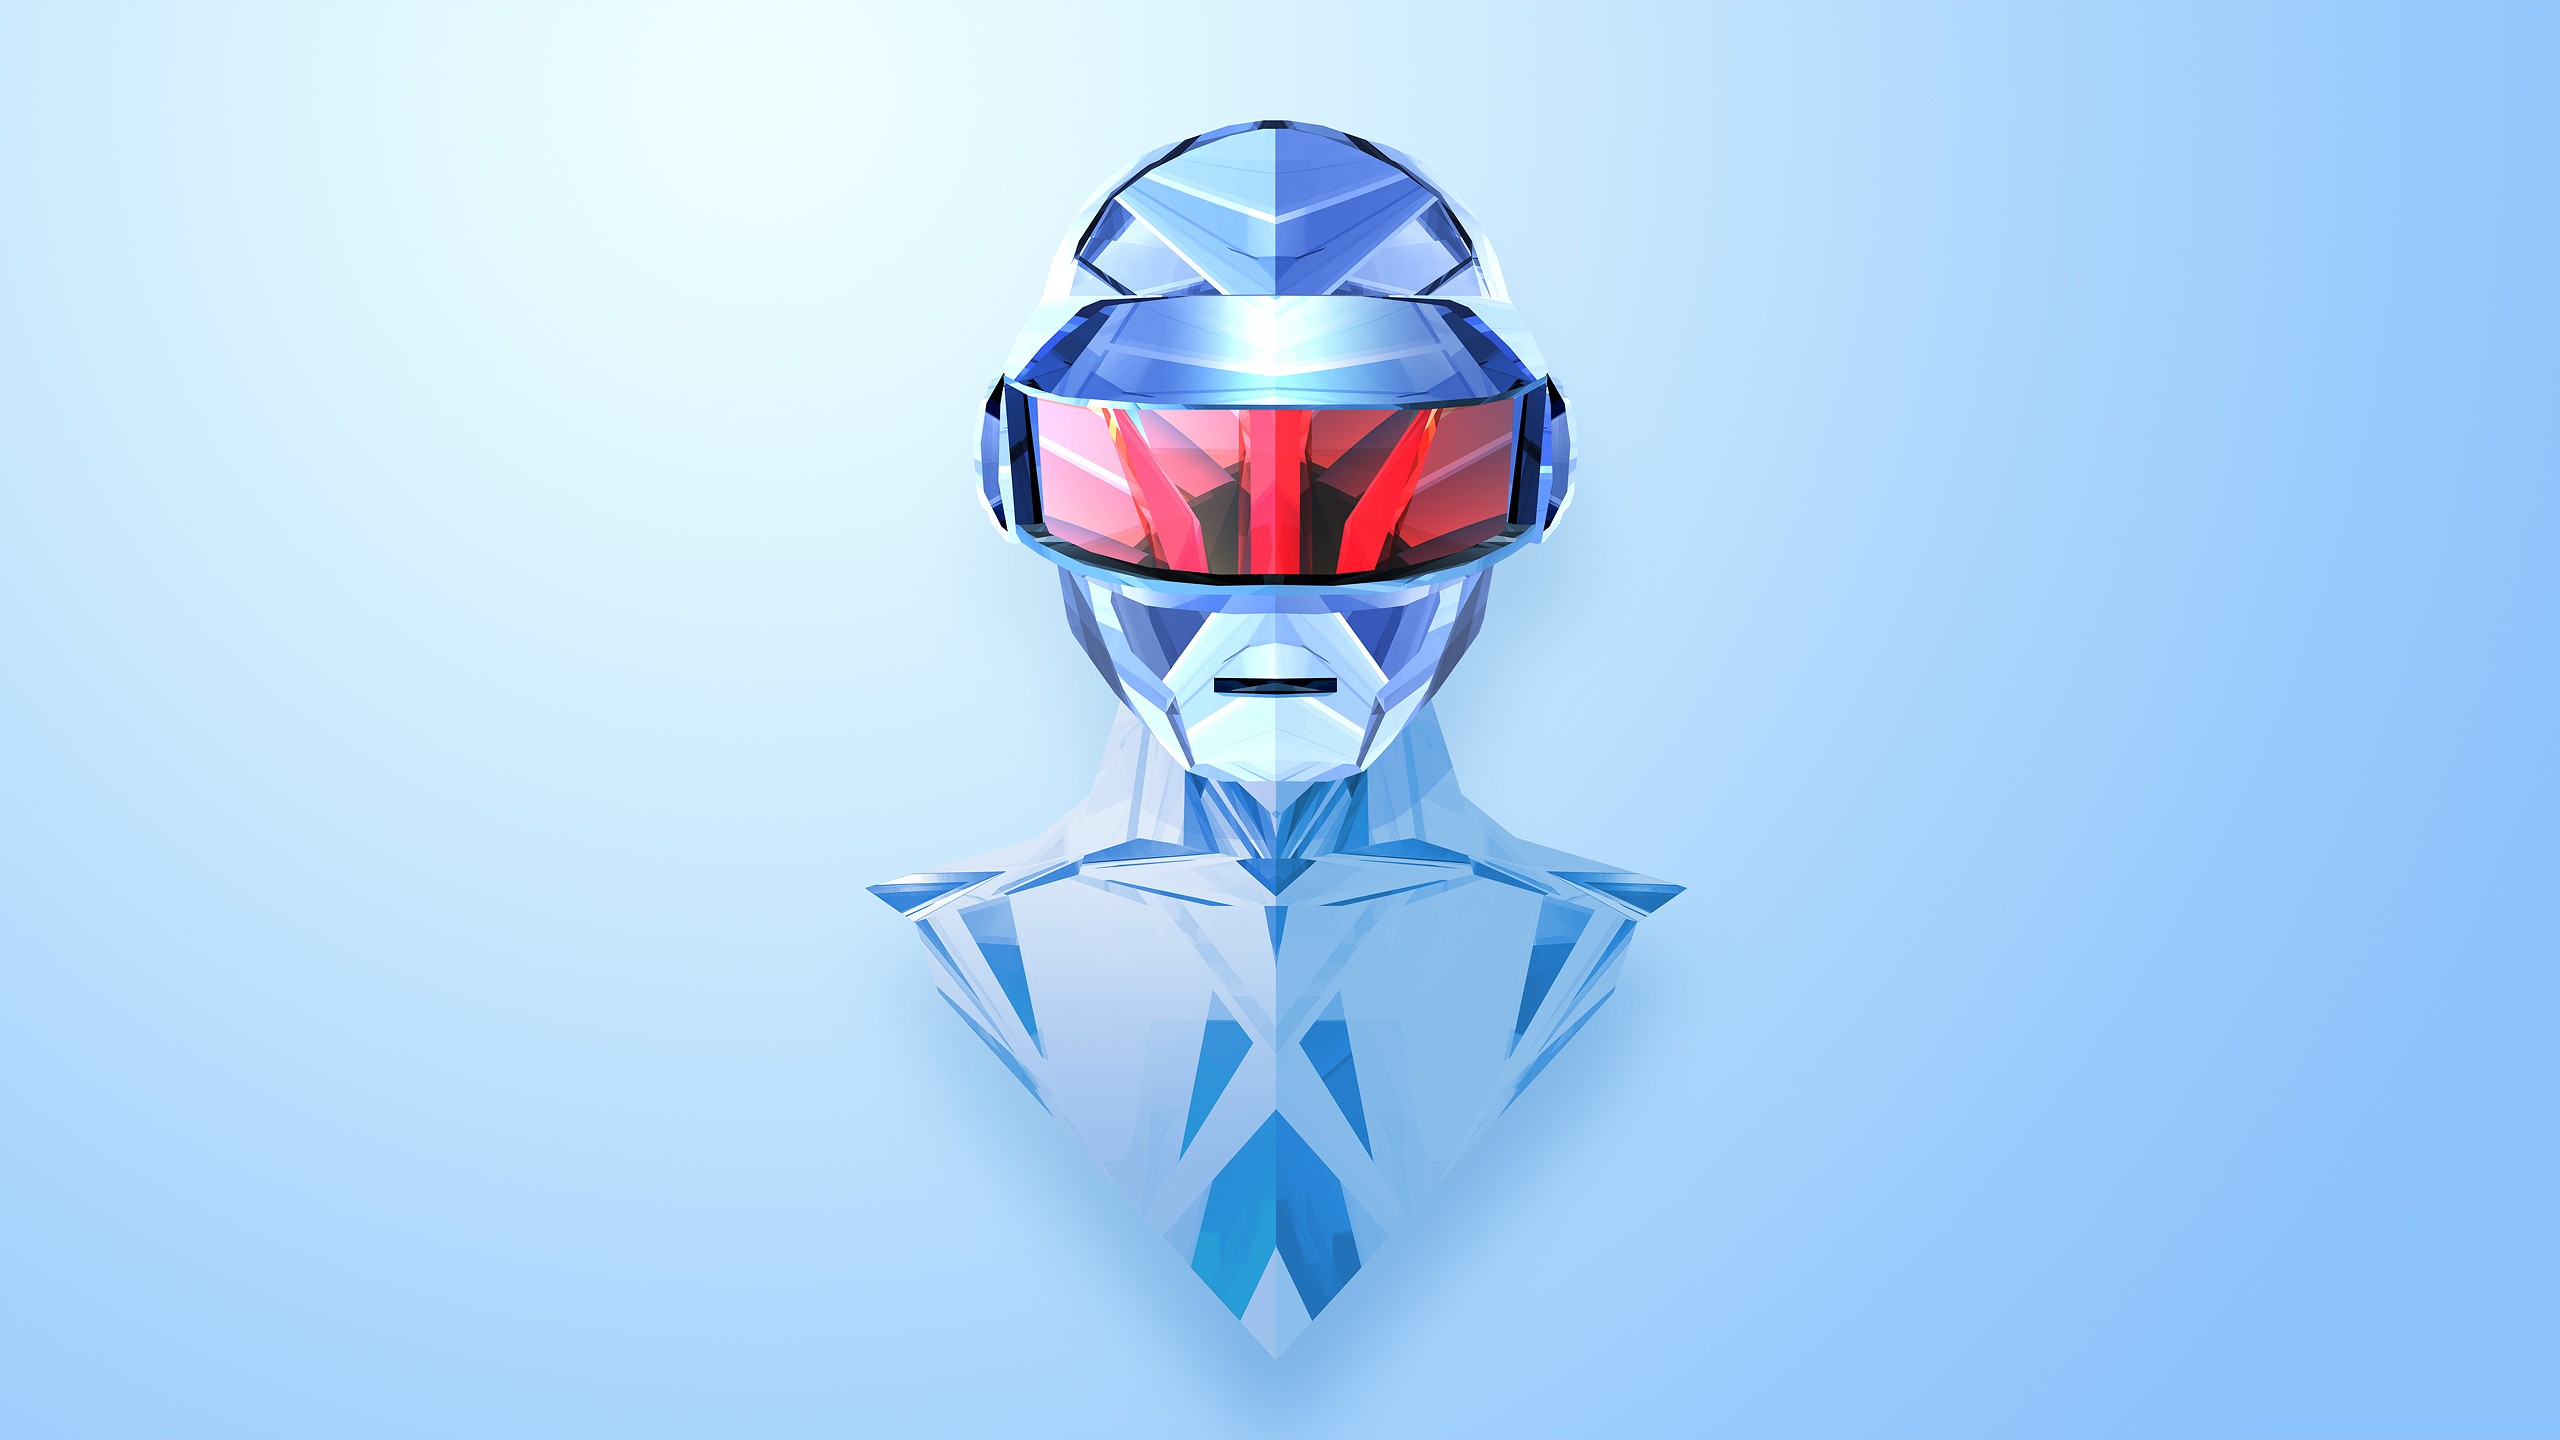 General 2560x1440 abstract Justin Maller Daft Punk electronic music digital art gradient simple background music